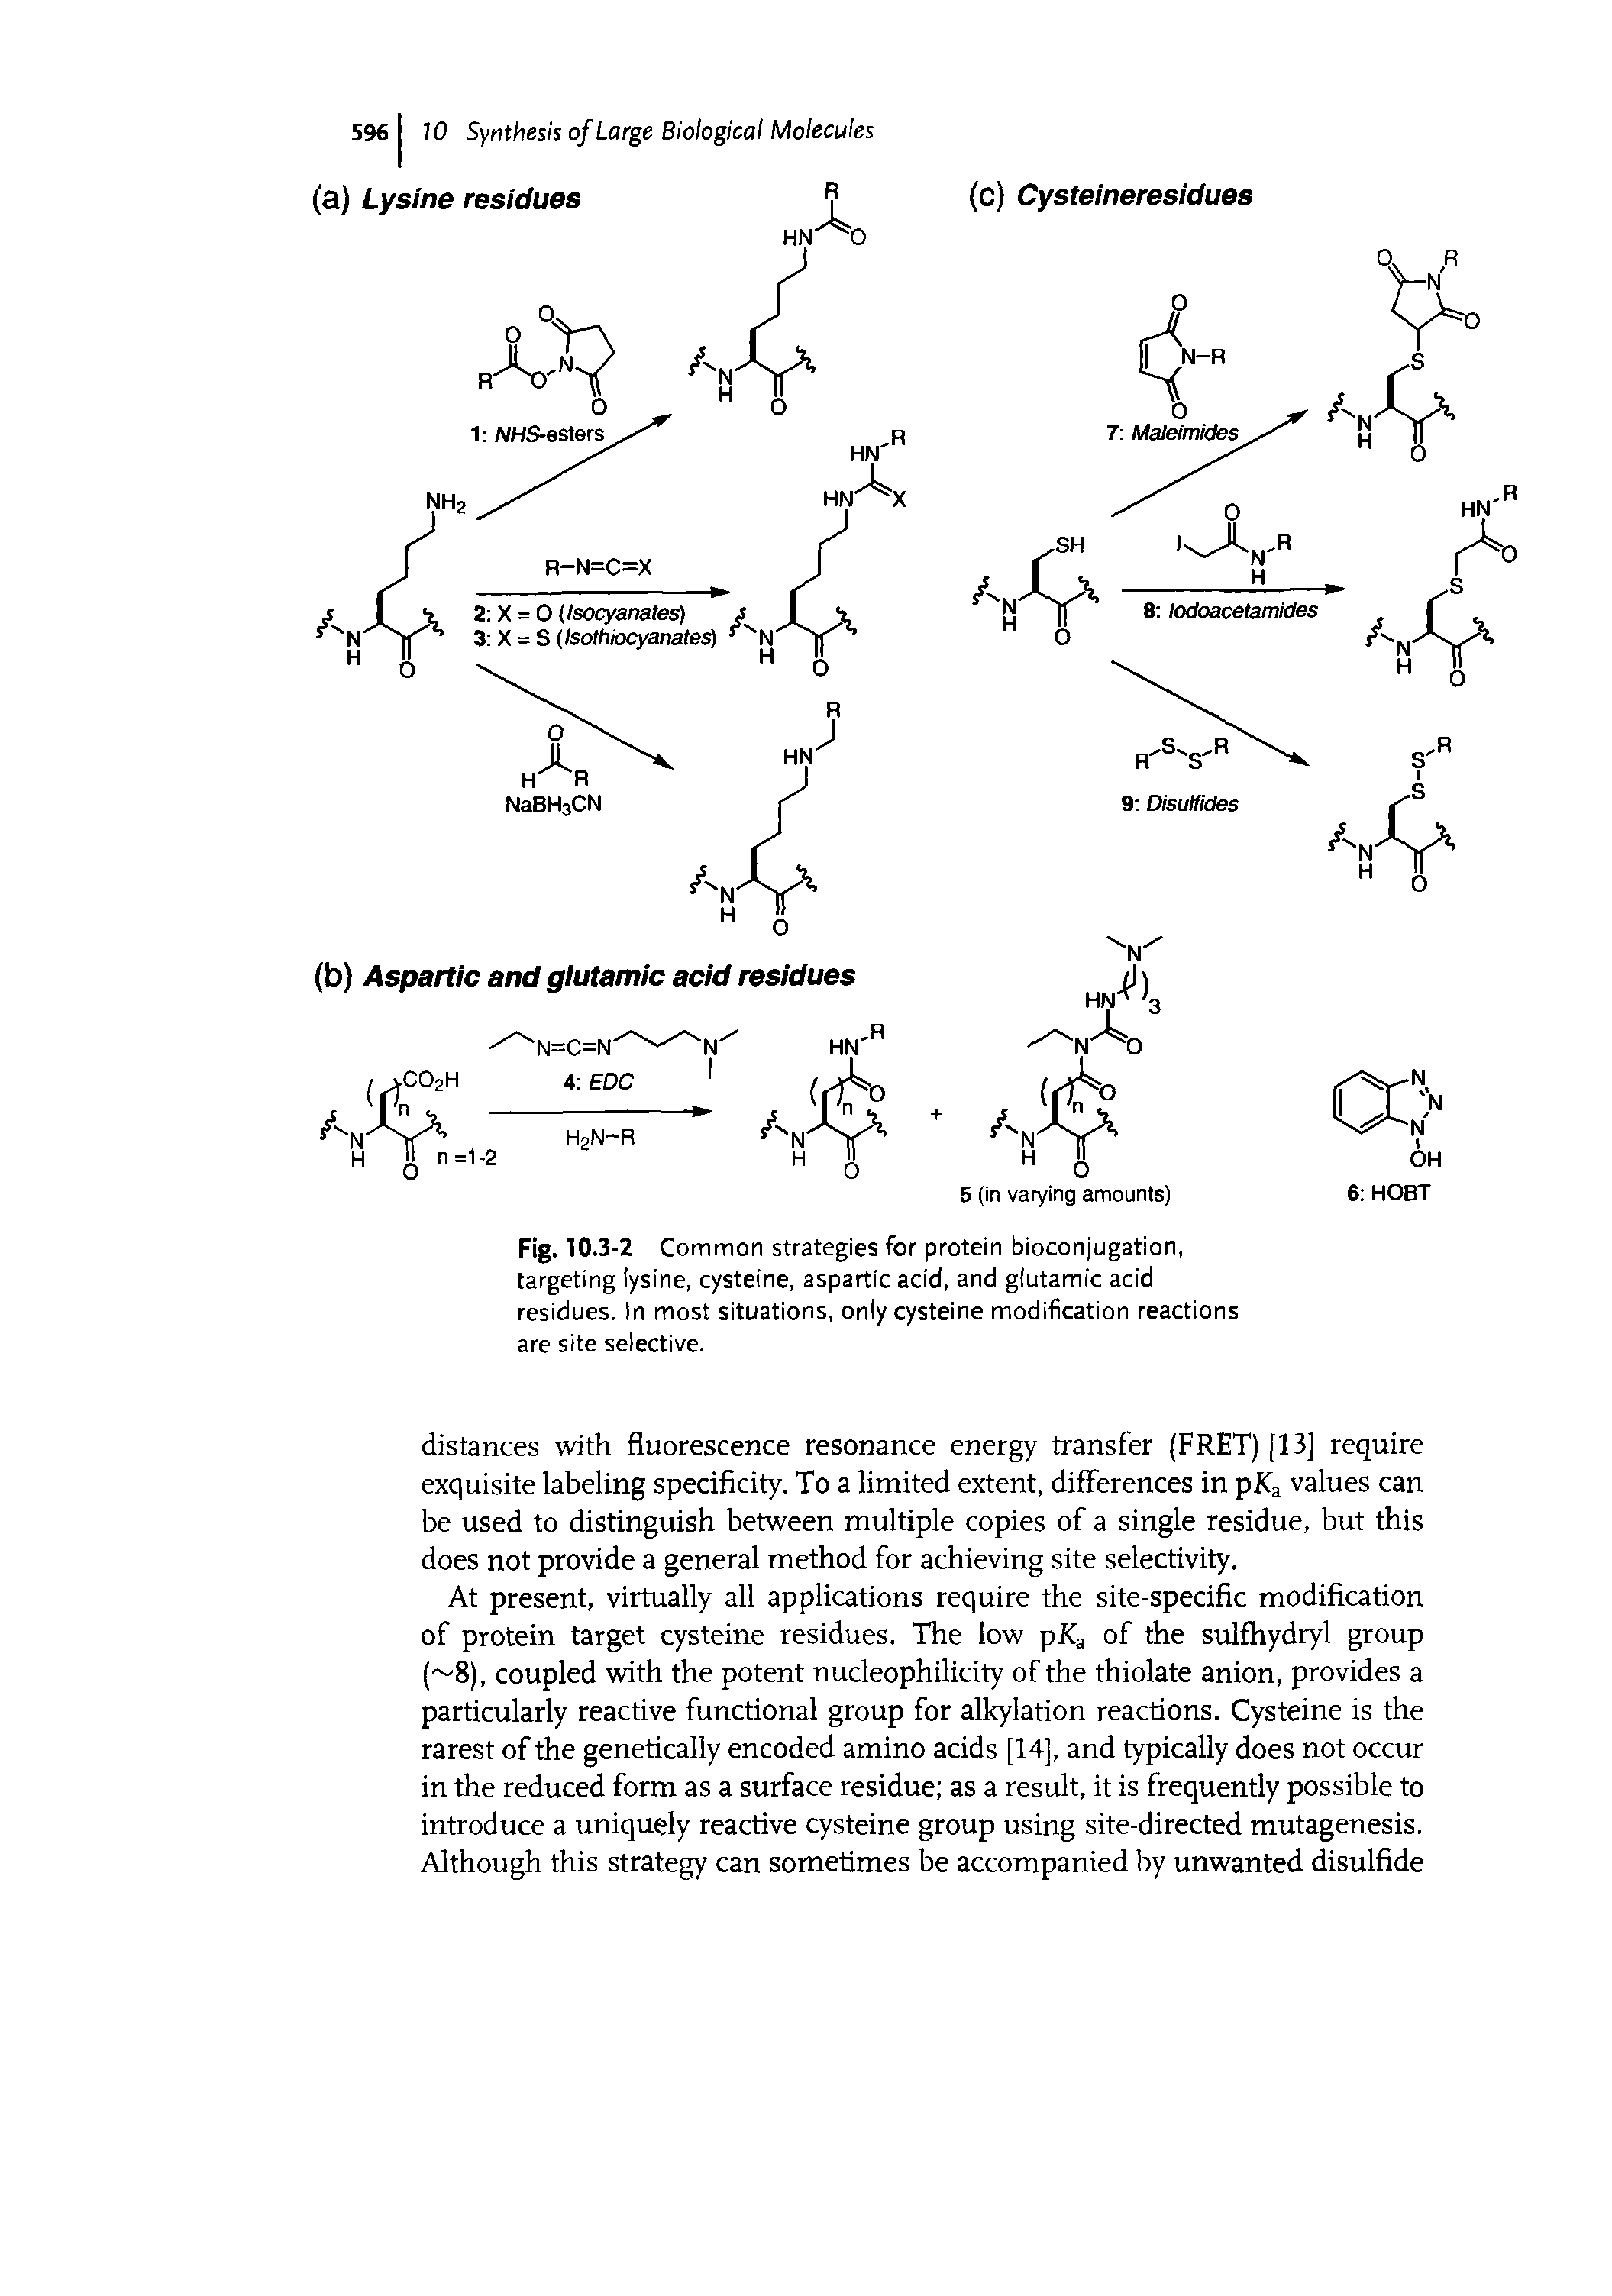 Fig. 10.3-2 Common strategies for protein bioconjugation, targeting lysine, cysteine, aspartic acid, and glutamic acid residues. In most situations, only cysteine modification reactions are site selective.